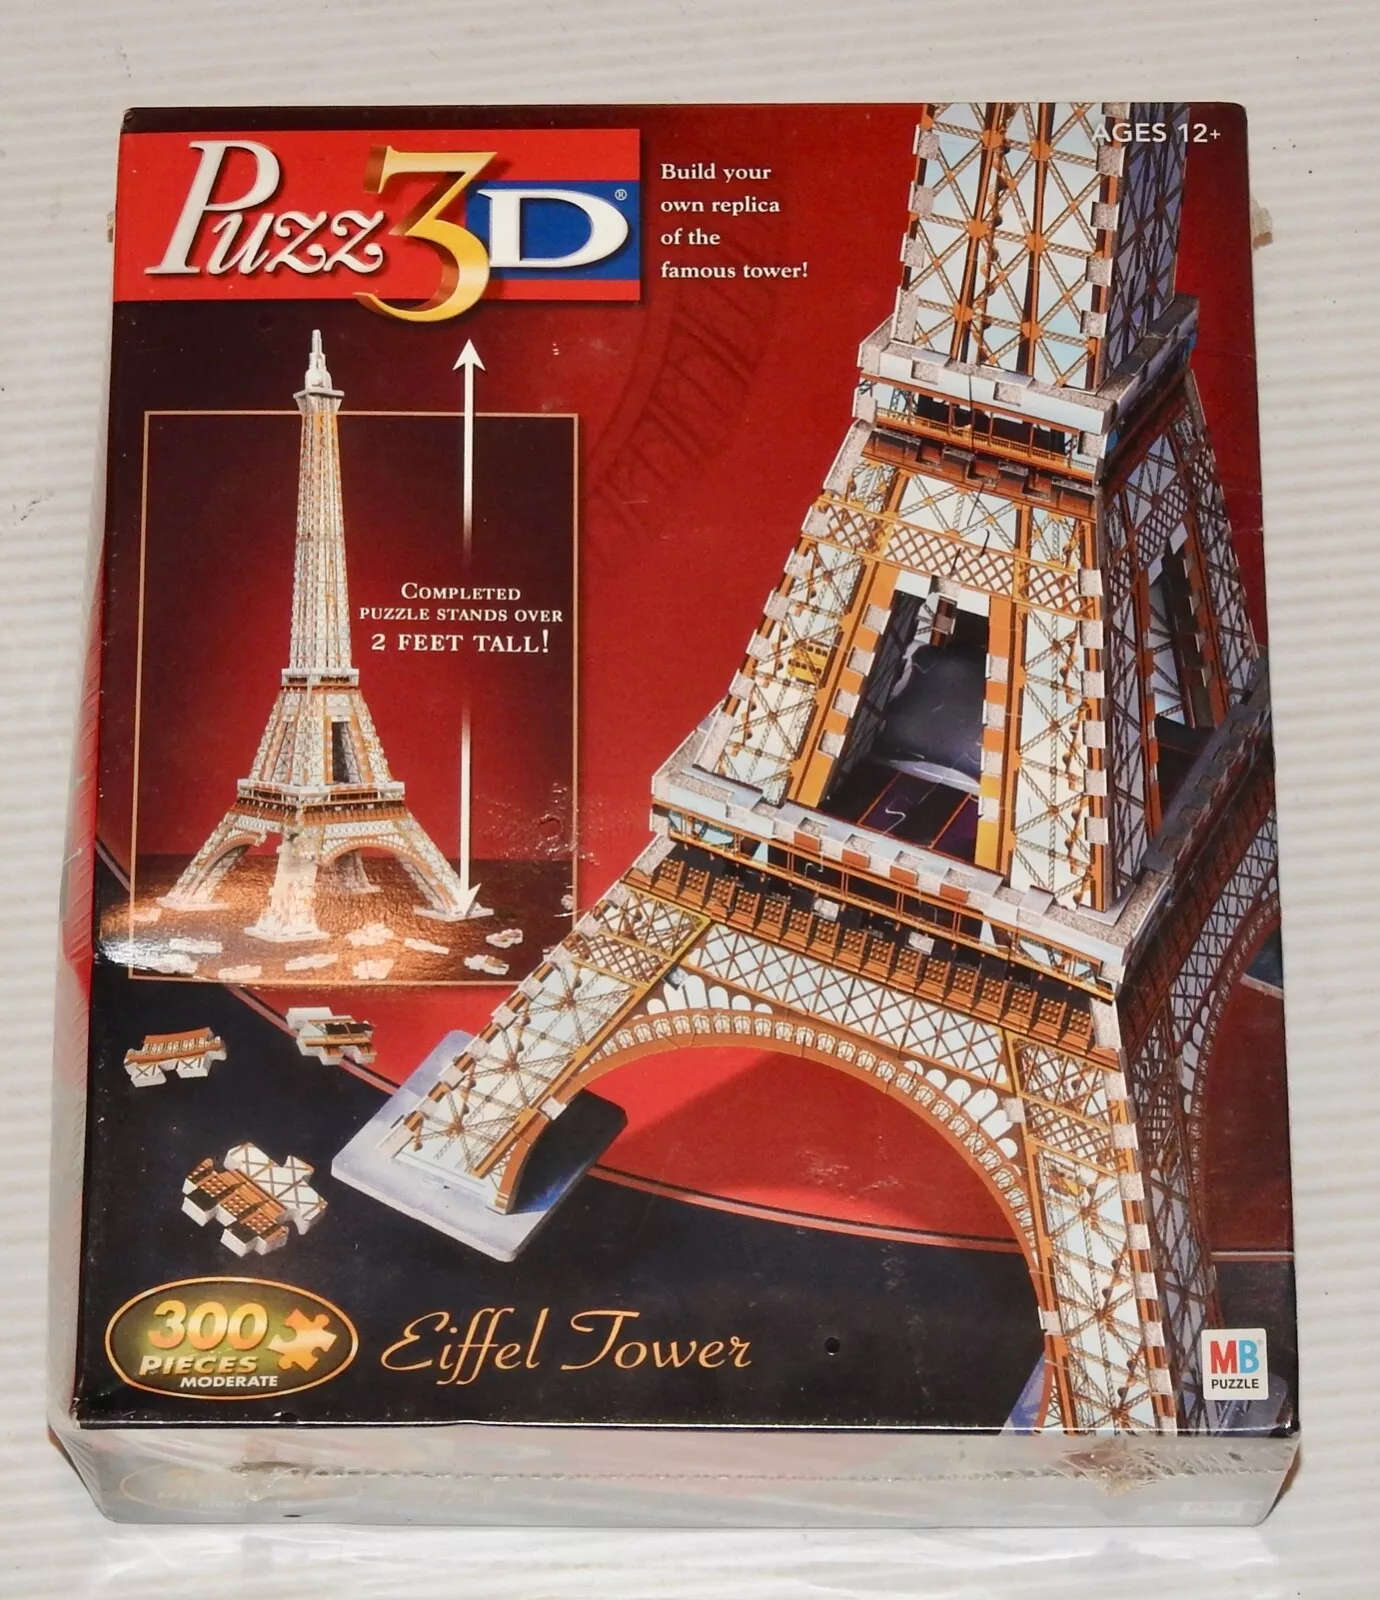 Eiffel Tower 3D Puzzle 300 Pieces Wrebbit 2005 Over 2 Feet Tall